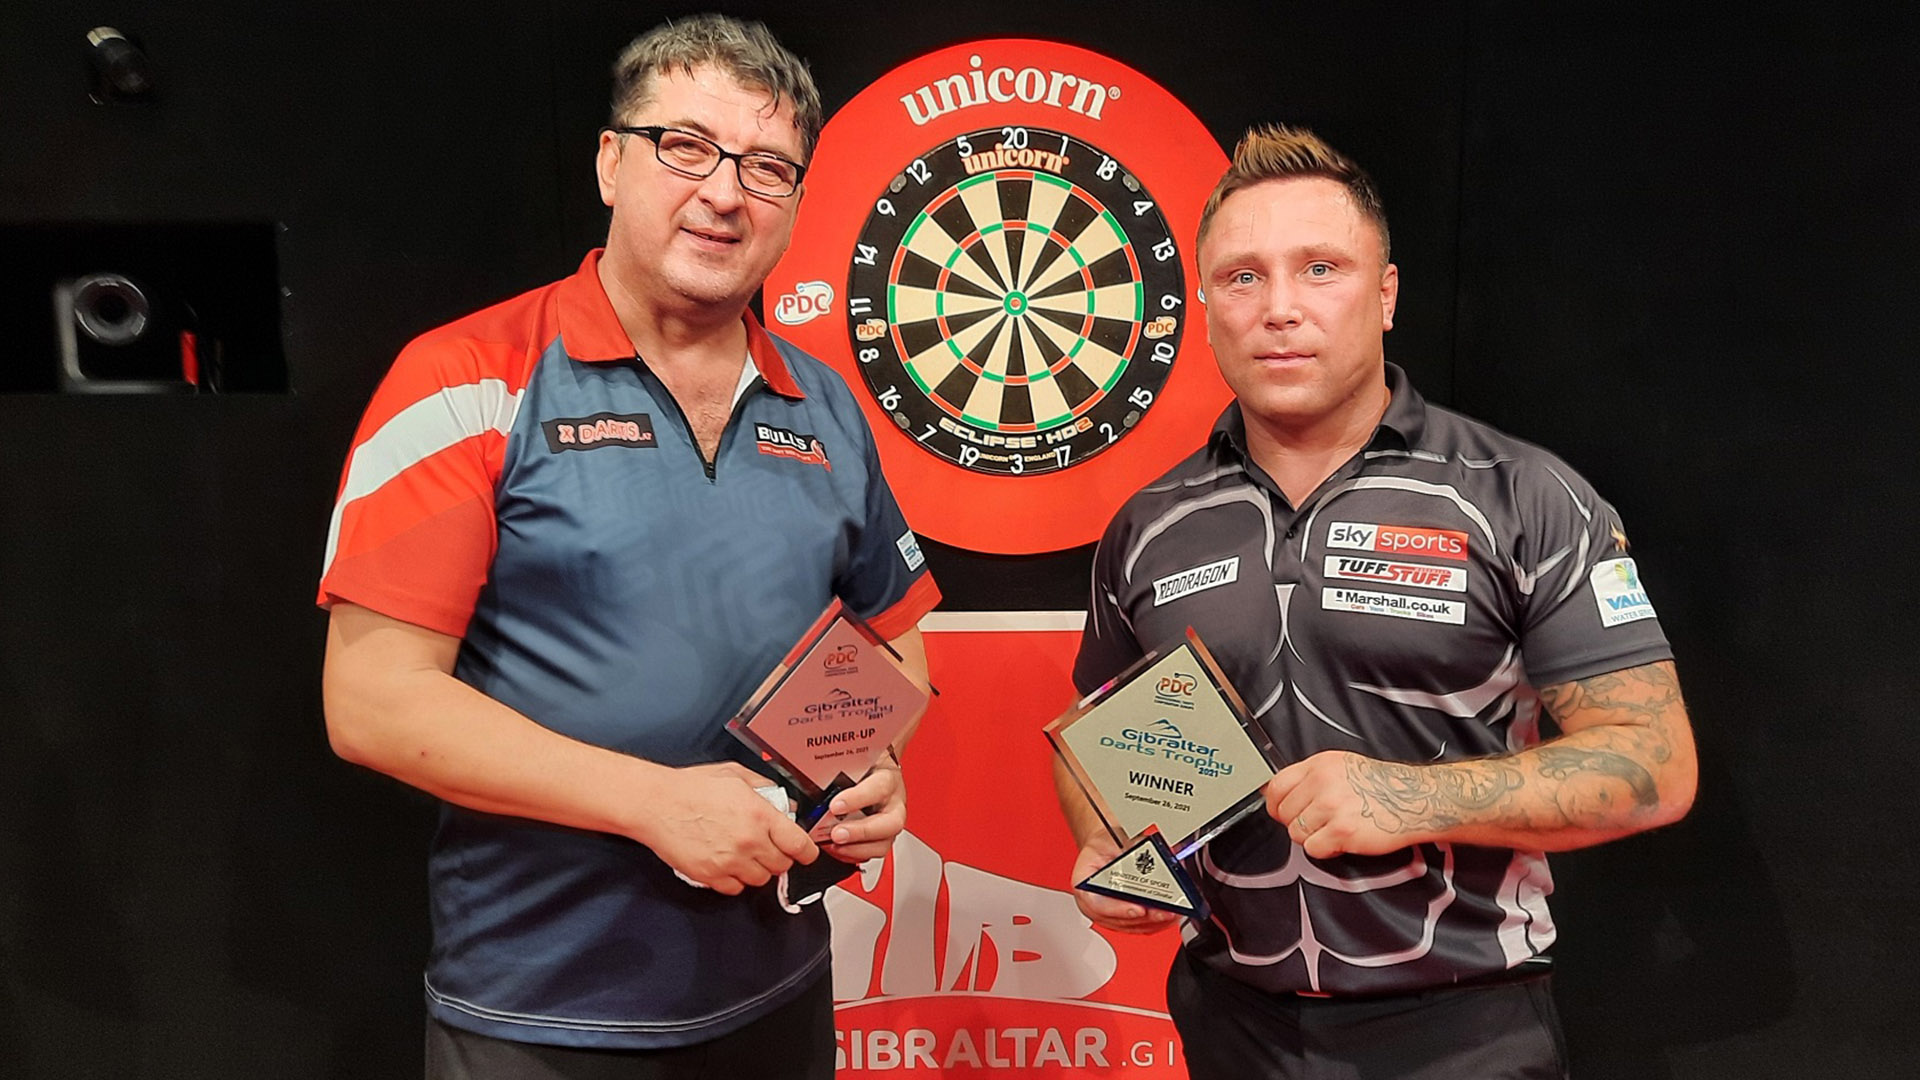 Gibraltar Darts Trophy 2021 Draw, schedule, results, odds and TV coverage details